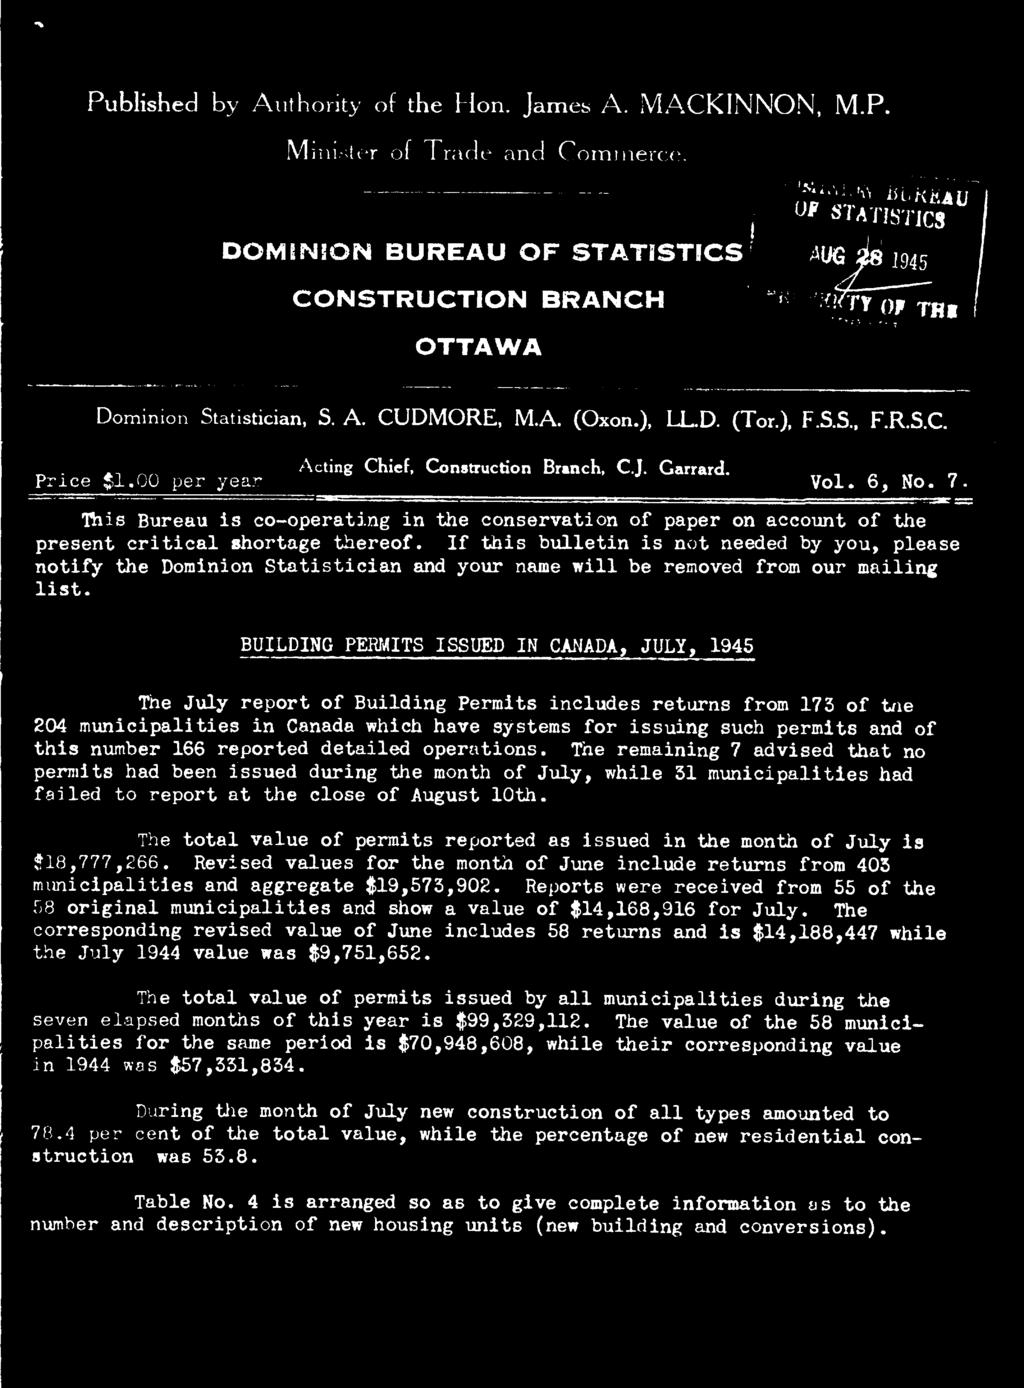 BUILDING PERMITS ISSUED IN CANADA, JULY, 1945 The July report of Building Permits includes returns from 173 of the 204 municipalities in Canada which have systems for issuing such permits and of this